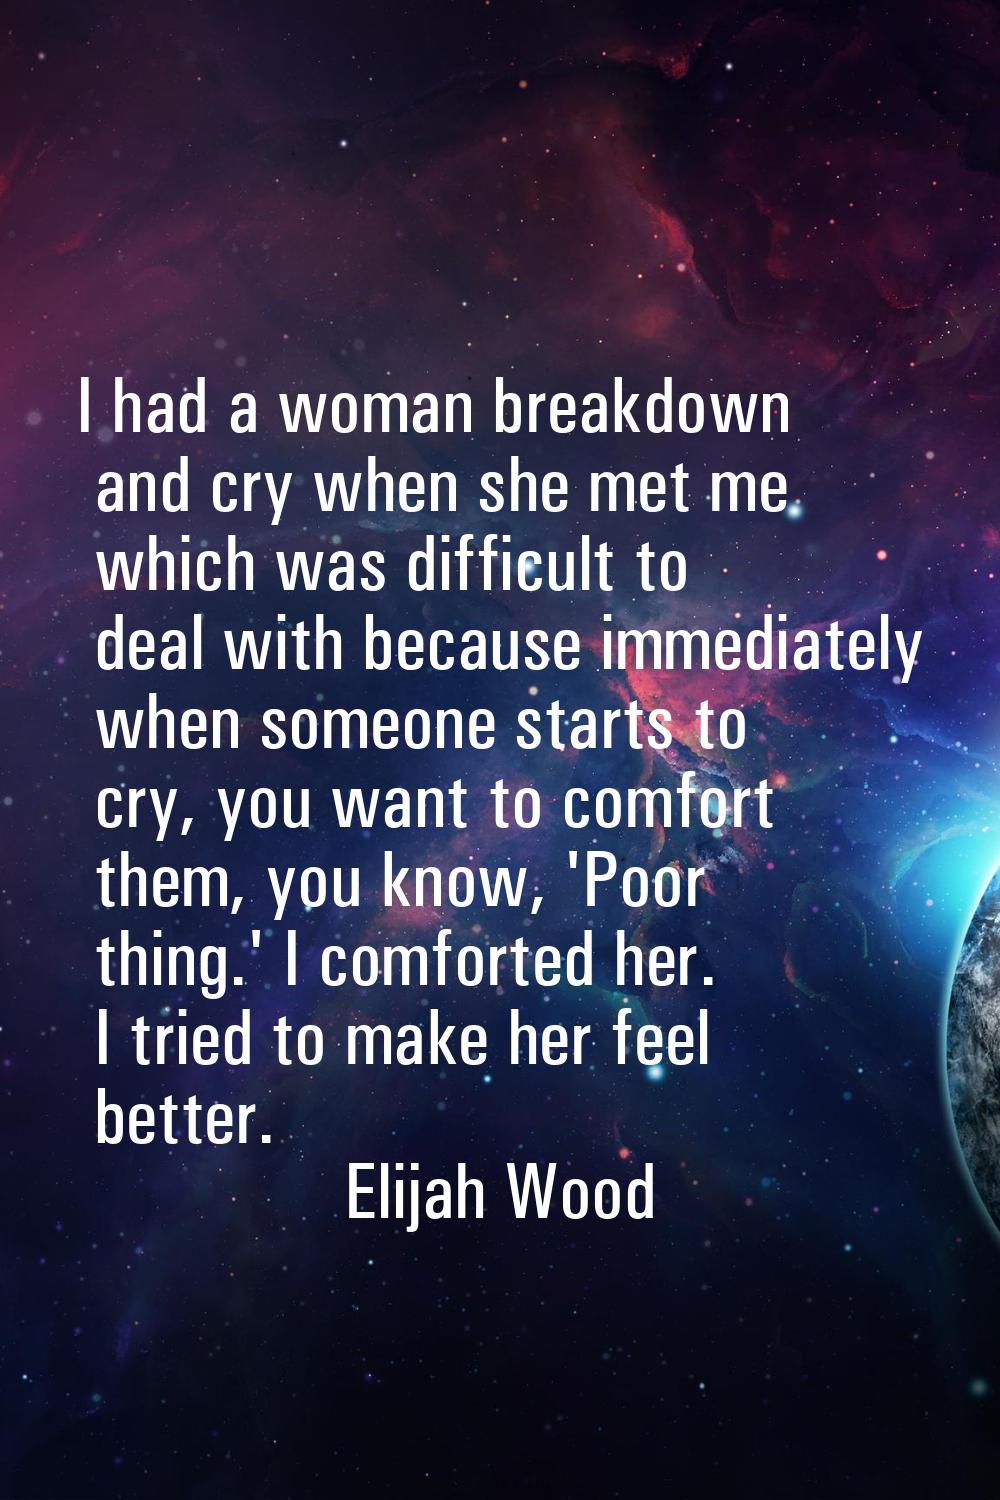 I had a woman breakdown and cry when she met me which was difficult to deal with because immediatel